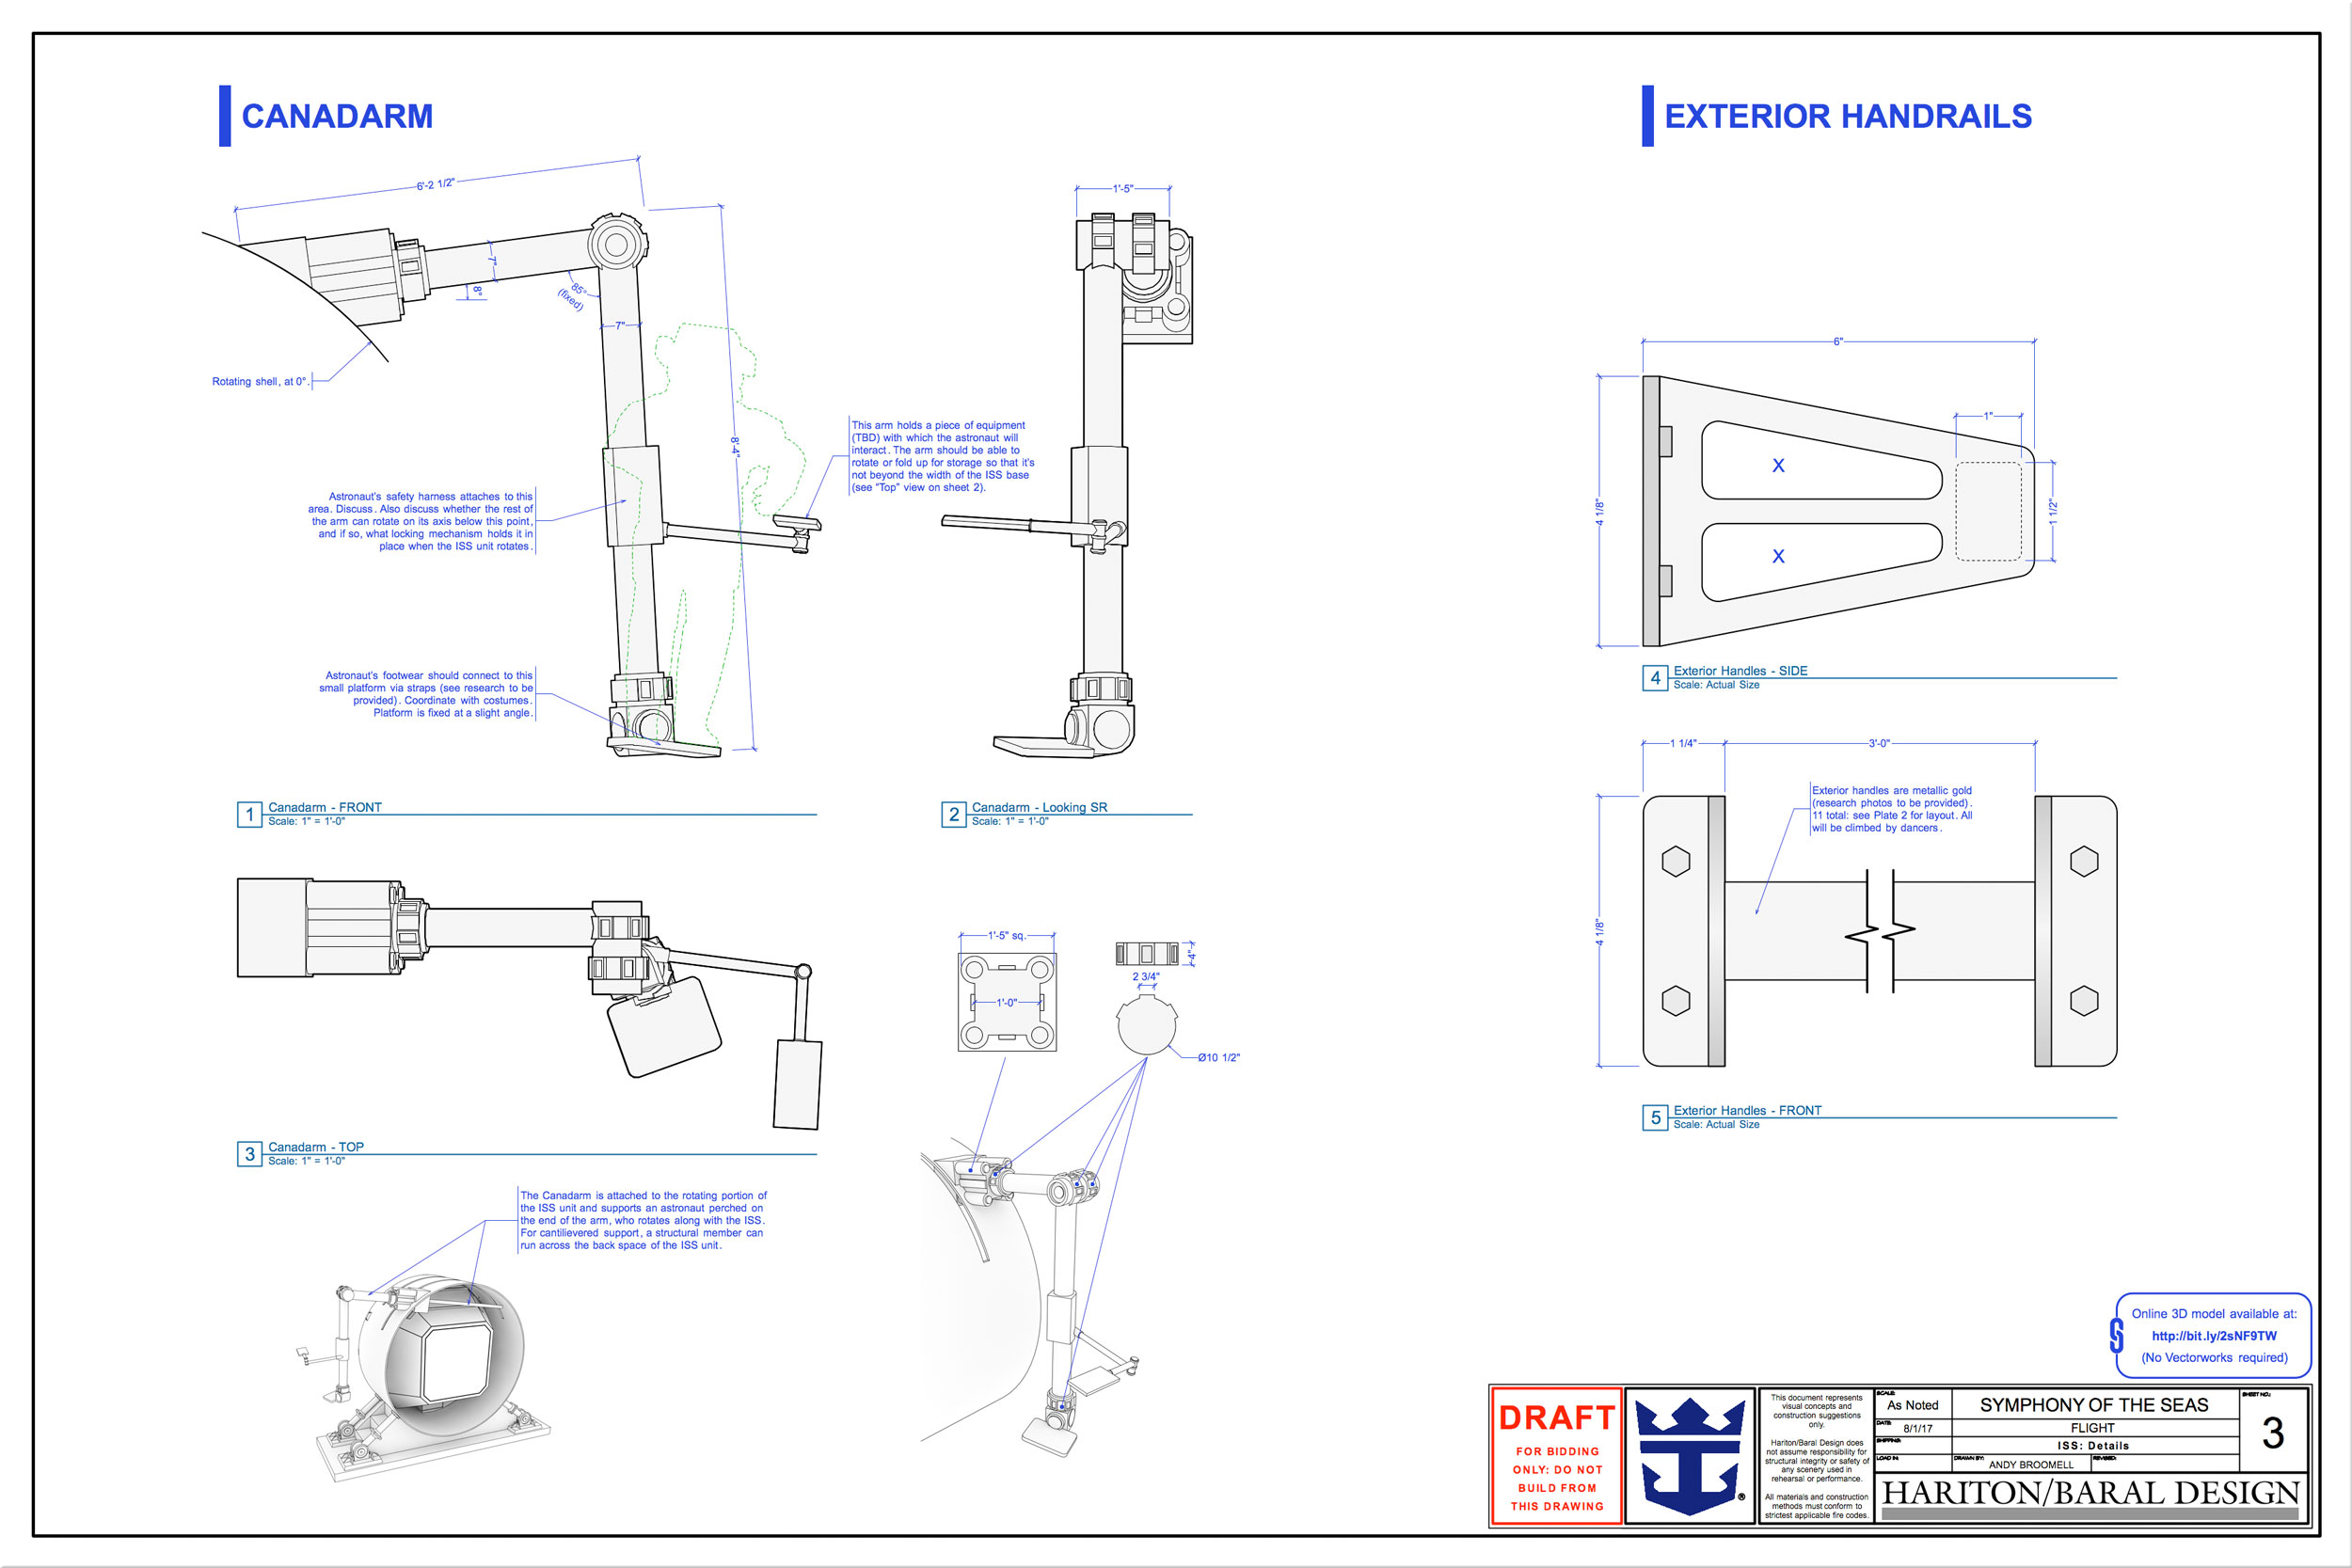 andy-broomell-vectorworks-drafting-iss-3.jpg